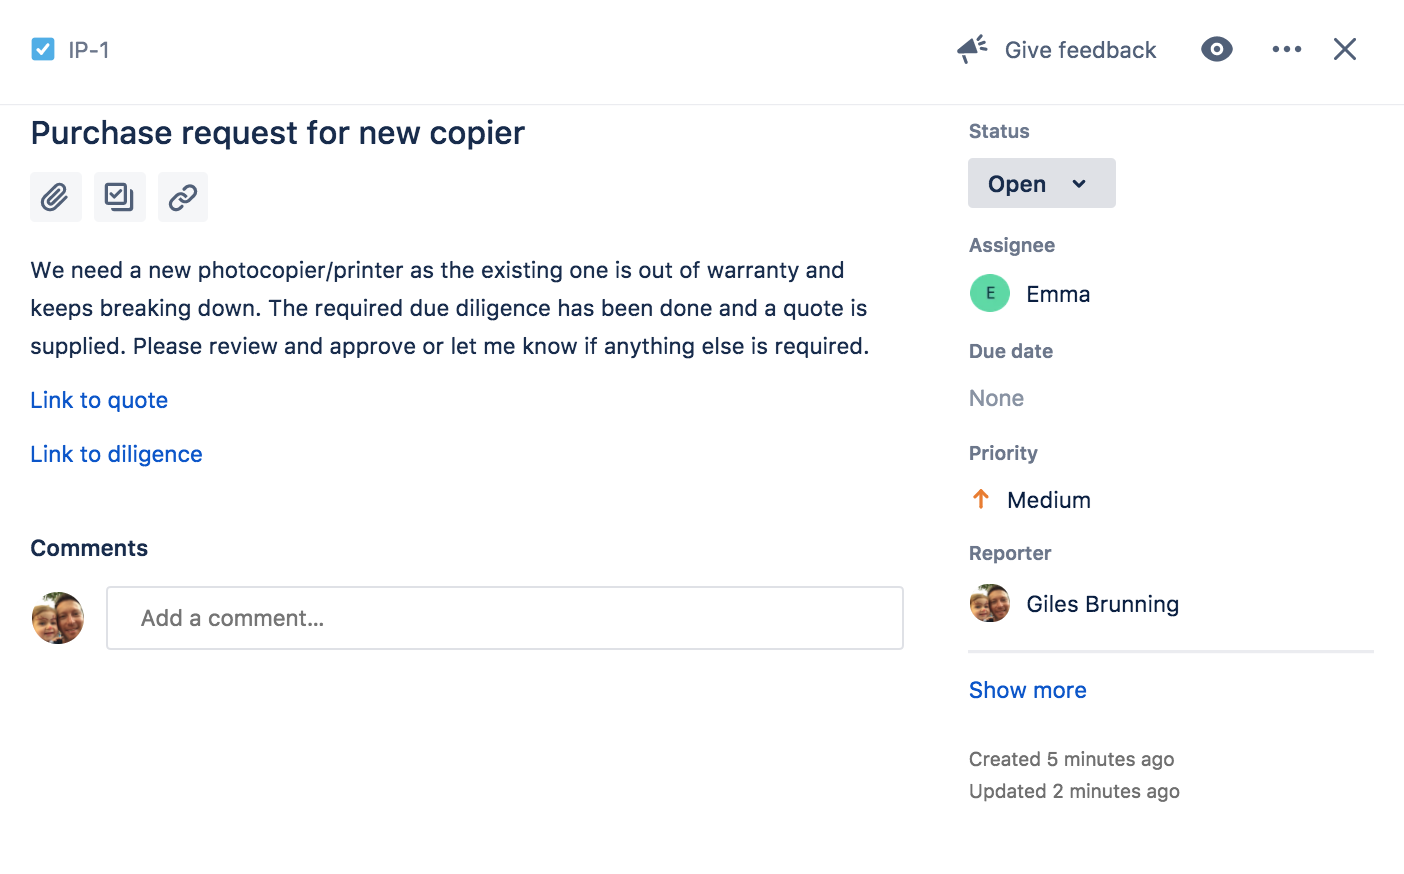 An open Jira issue assigned to Emma, which is a purchase request for a new copier. It has a description and medium priority.